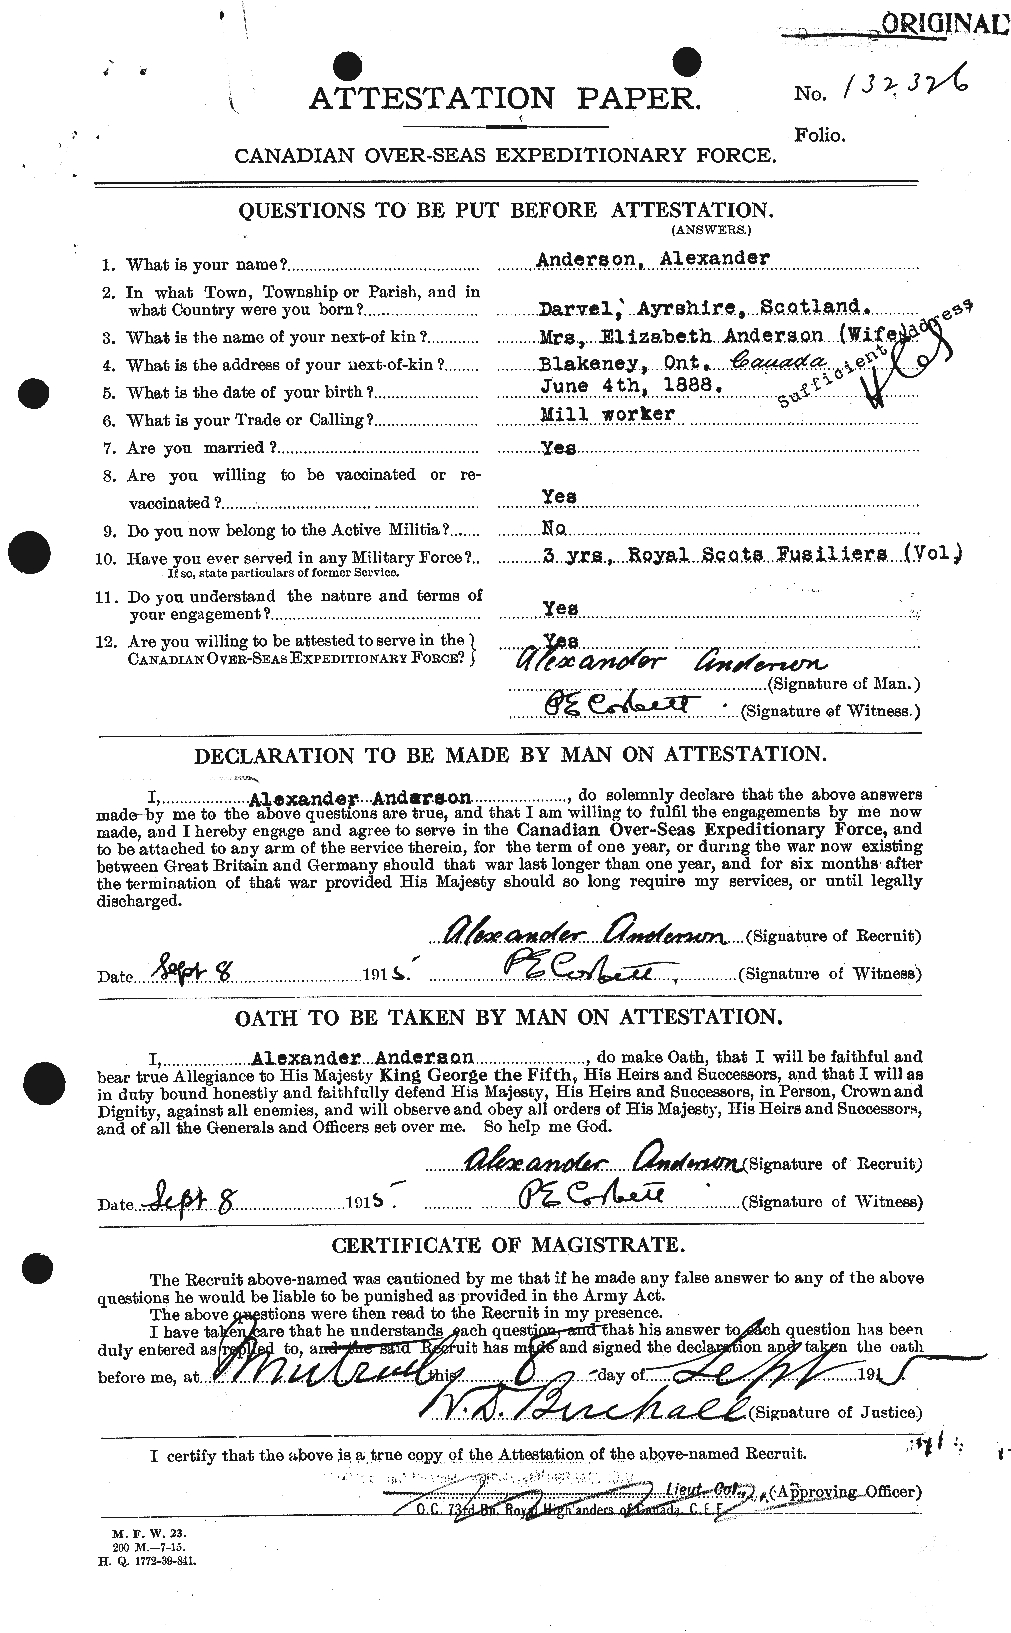 Personnel Records of the First World War - CEF 209506a